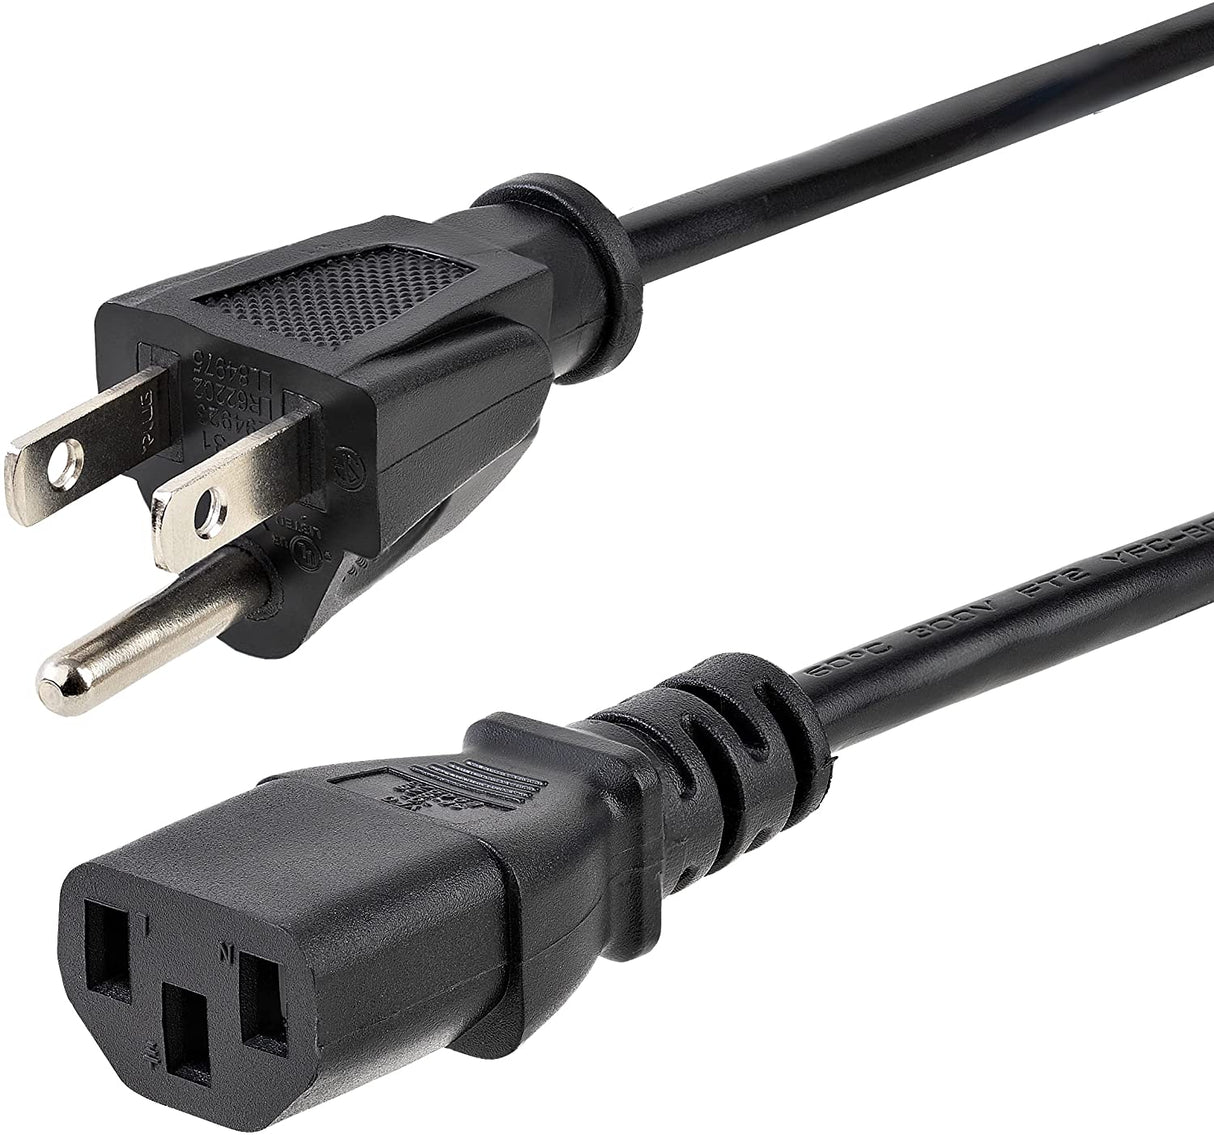 StarTech.com 25ft (7.6m) Computer Power Cord, NEMA 5-15P to C13, 10A 125V, 18AWG, Black Replacement AC Power Cord, Printer Power Cord, PC Power Supply Cable, Monitor Power Cable - UL Listed (PXT10125) 25 ft/7.5 m 1 Pack